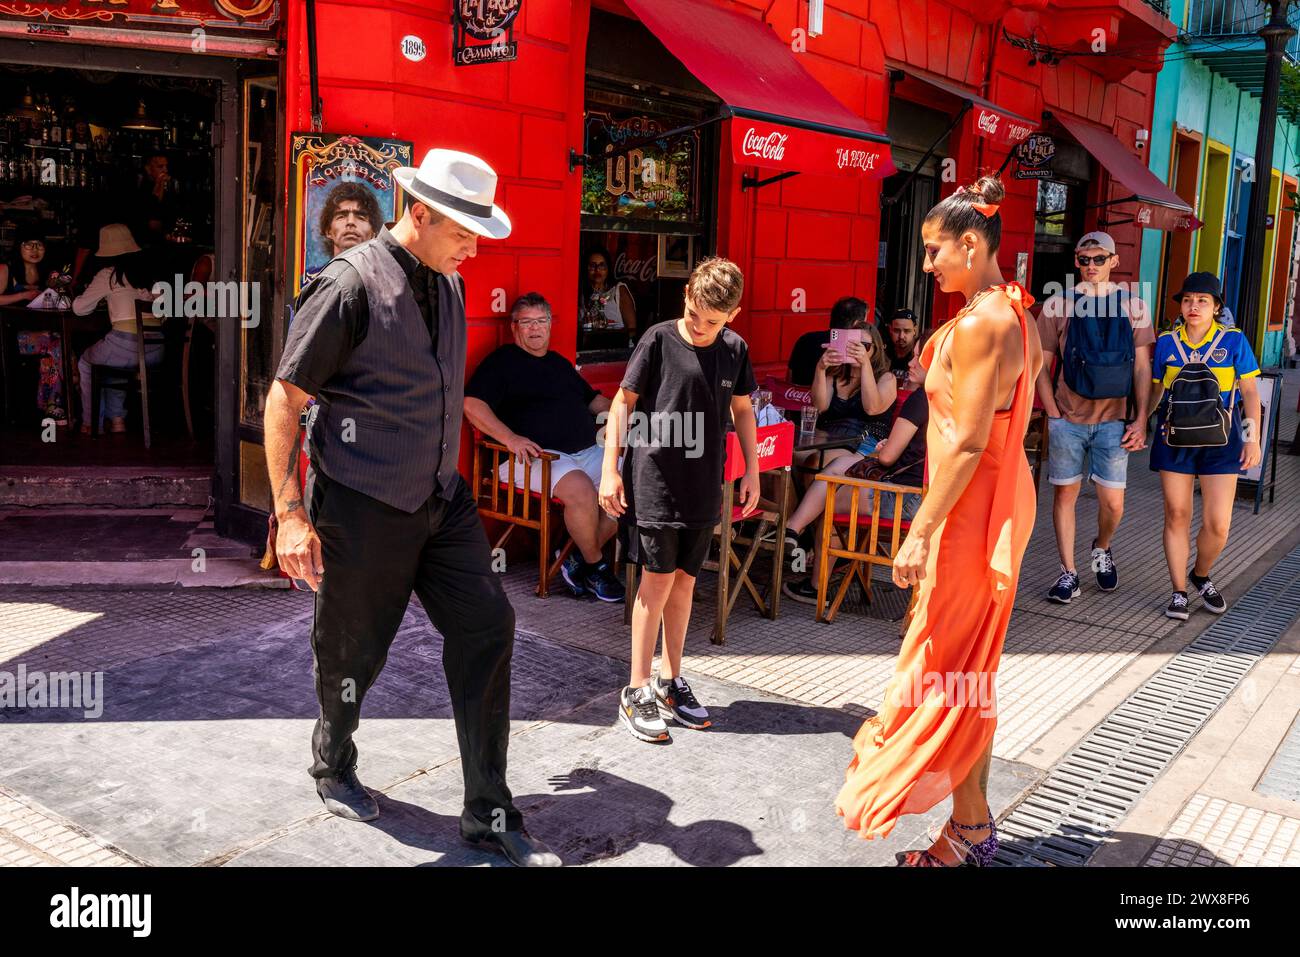 Two Tango Dancers Showing A Boy How To Dance The Tango Outside A Cafe In The Colourful La Boca District of Buenos Aires, Argentina. Stock Photo